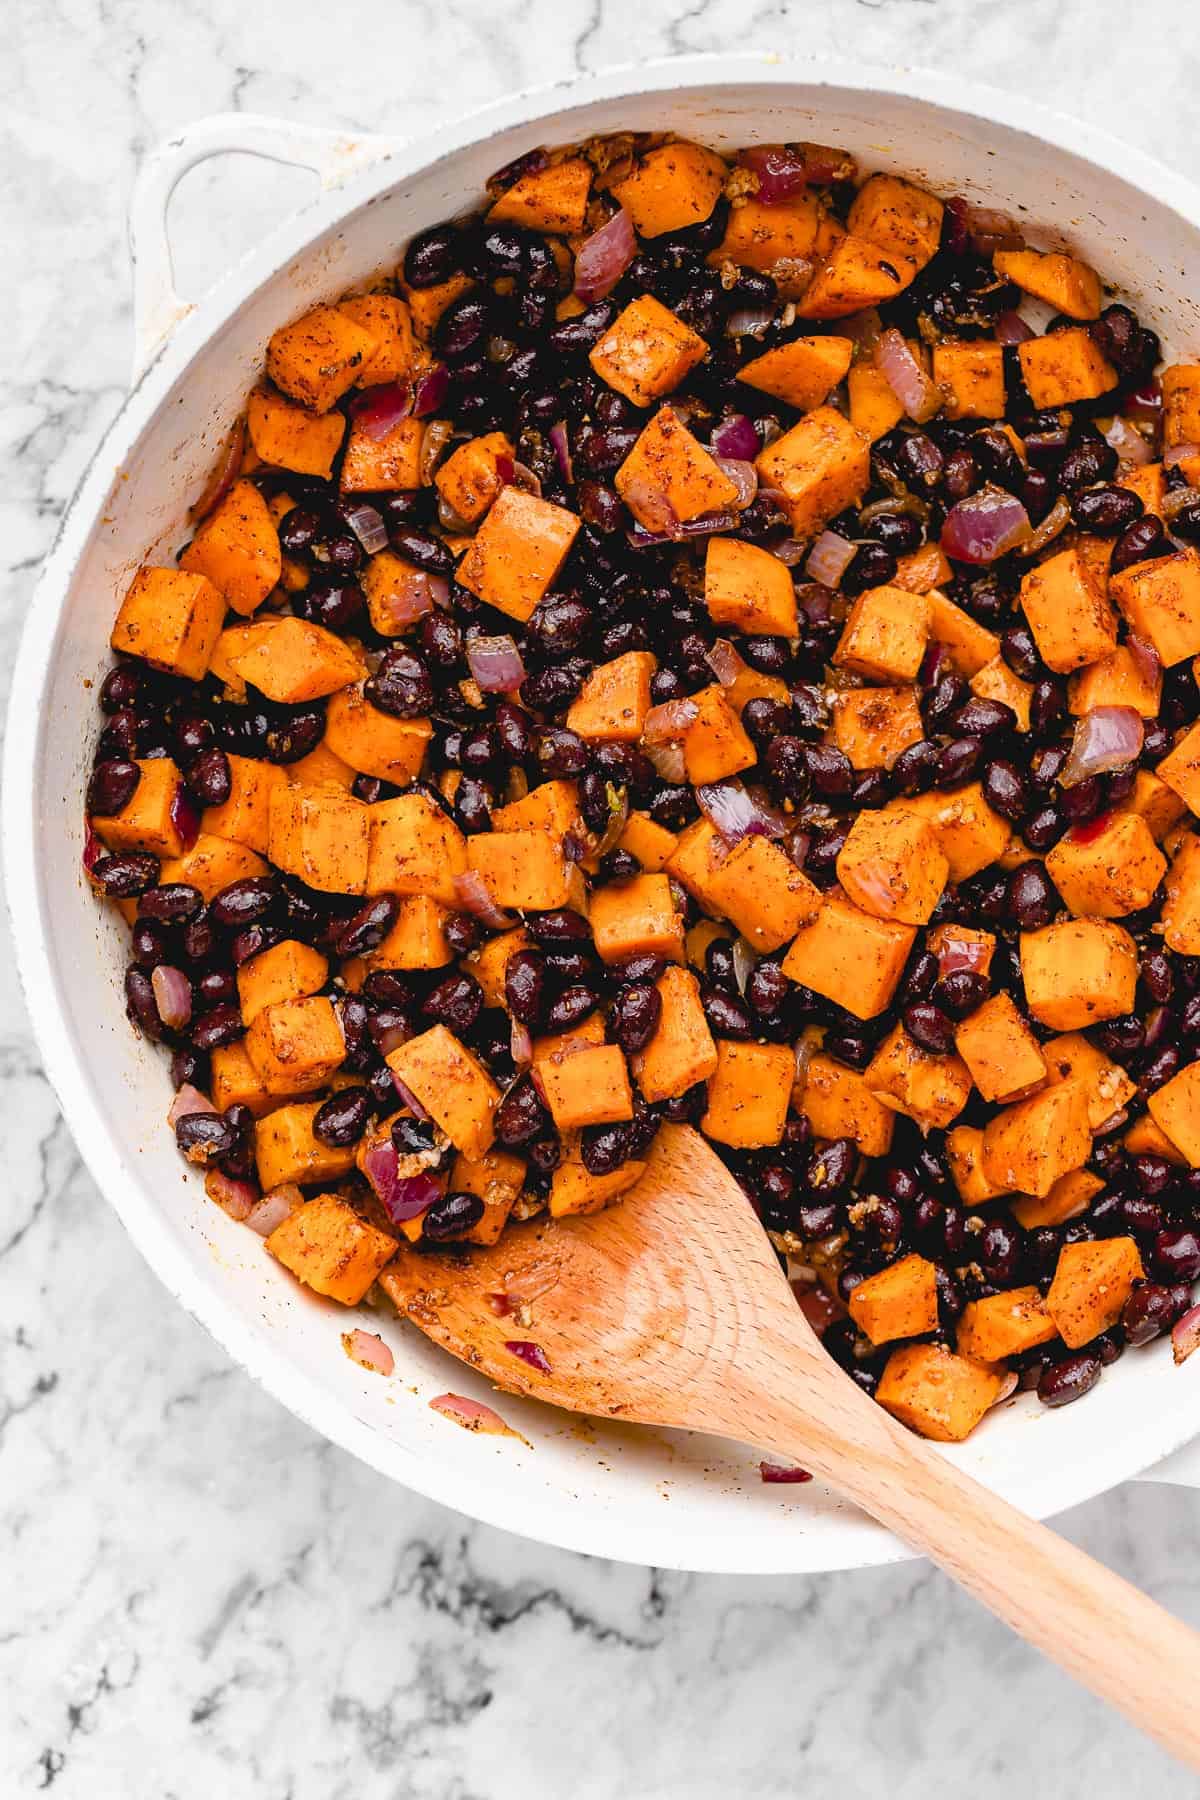 Chopped sweet potato with black beans in a pan.